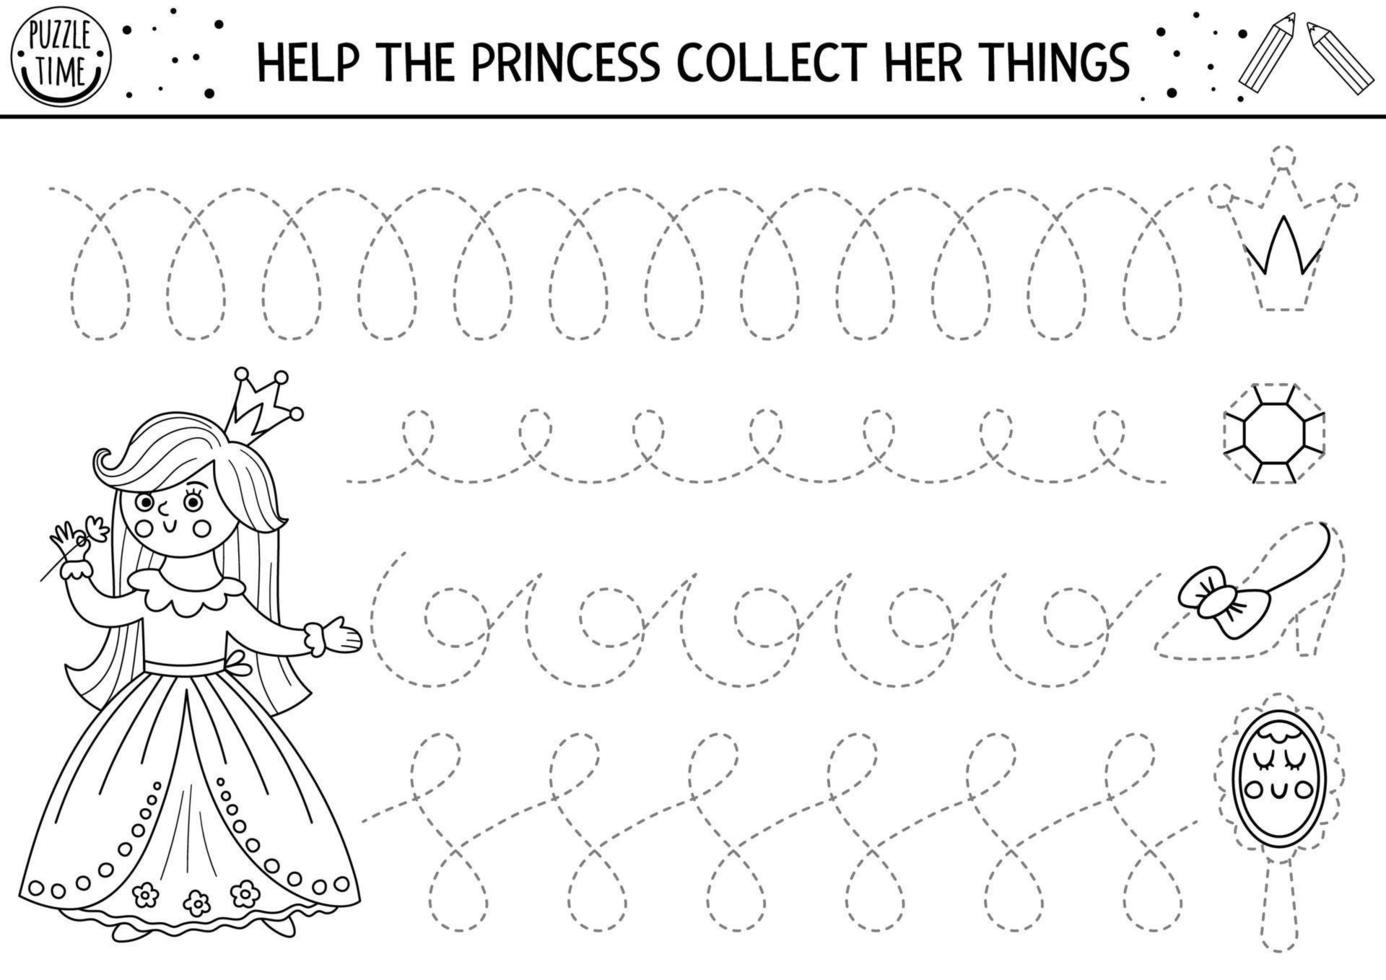 Vector magic kingdom handwriting practice worksheet. Fairytale printable black and white activity for preschool children. Fantasy tracing game for writing skills with cute princess, shoe, crown